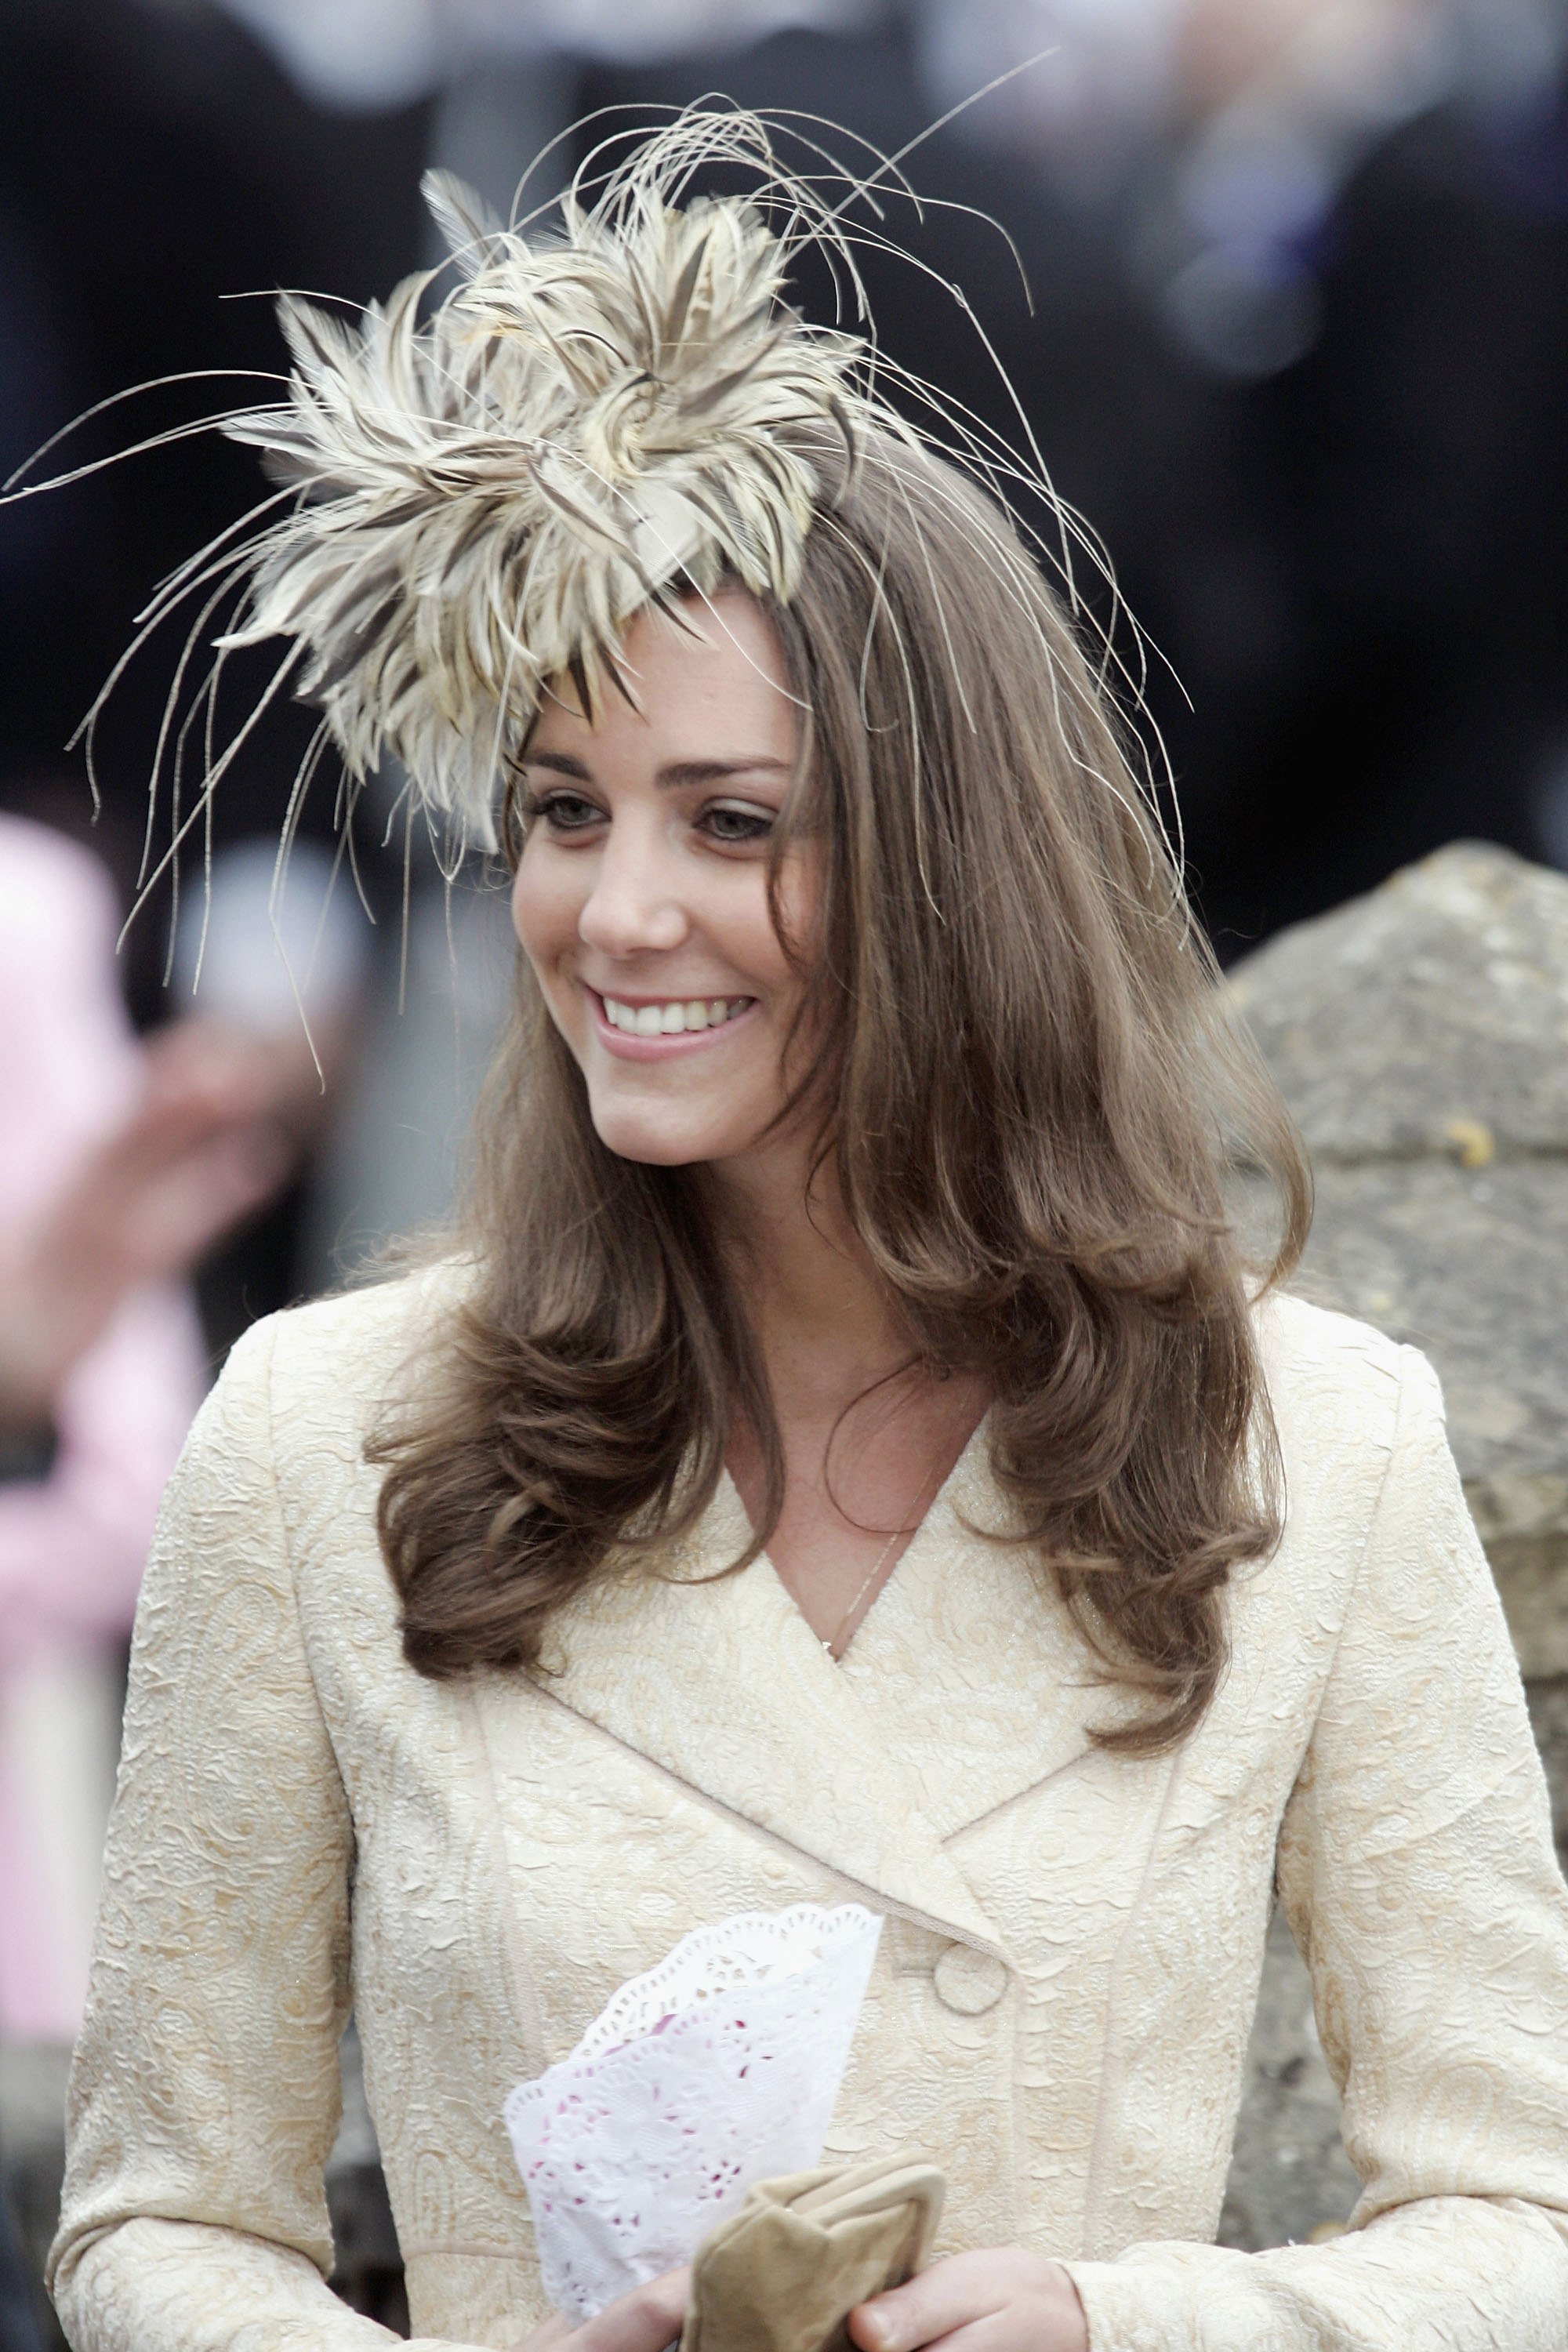 Kate Middleton, girlfriend of Prince Willliam, attends as wedding guest at the marriage of Laura Parker-Bowles and Harry Lopes at St Cyriac's Church, Lacock, on May 6, 2006 | Photo: GettyImages